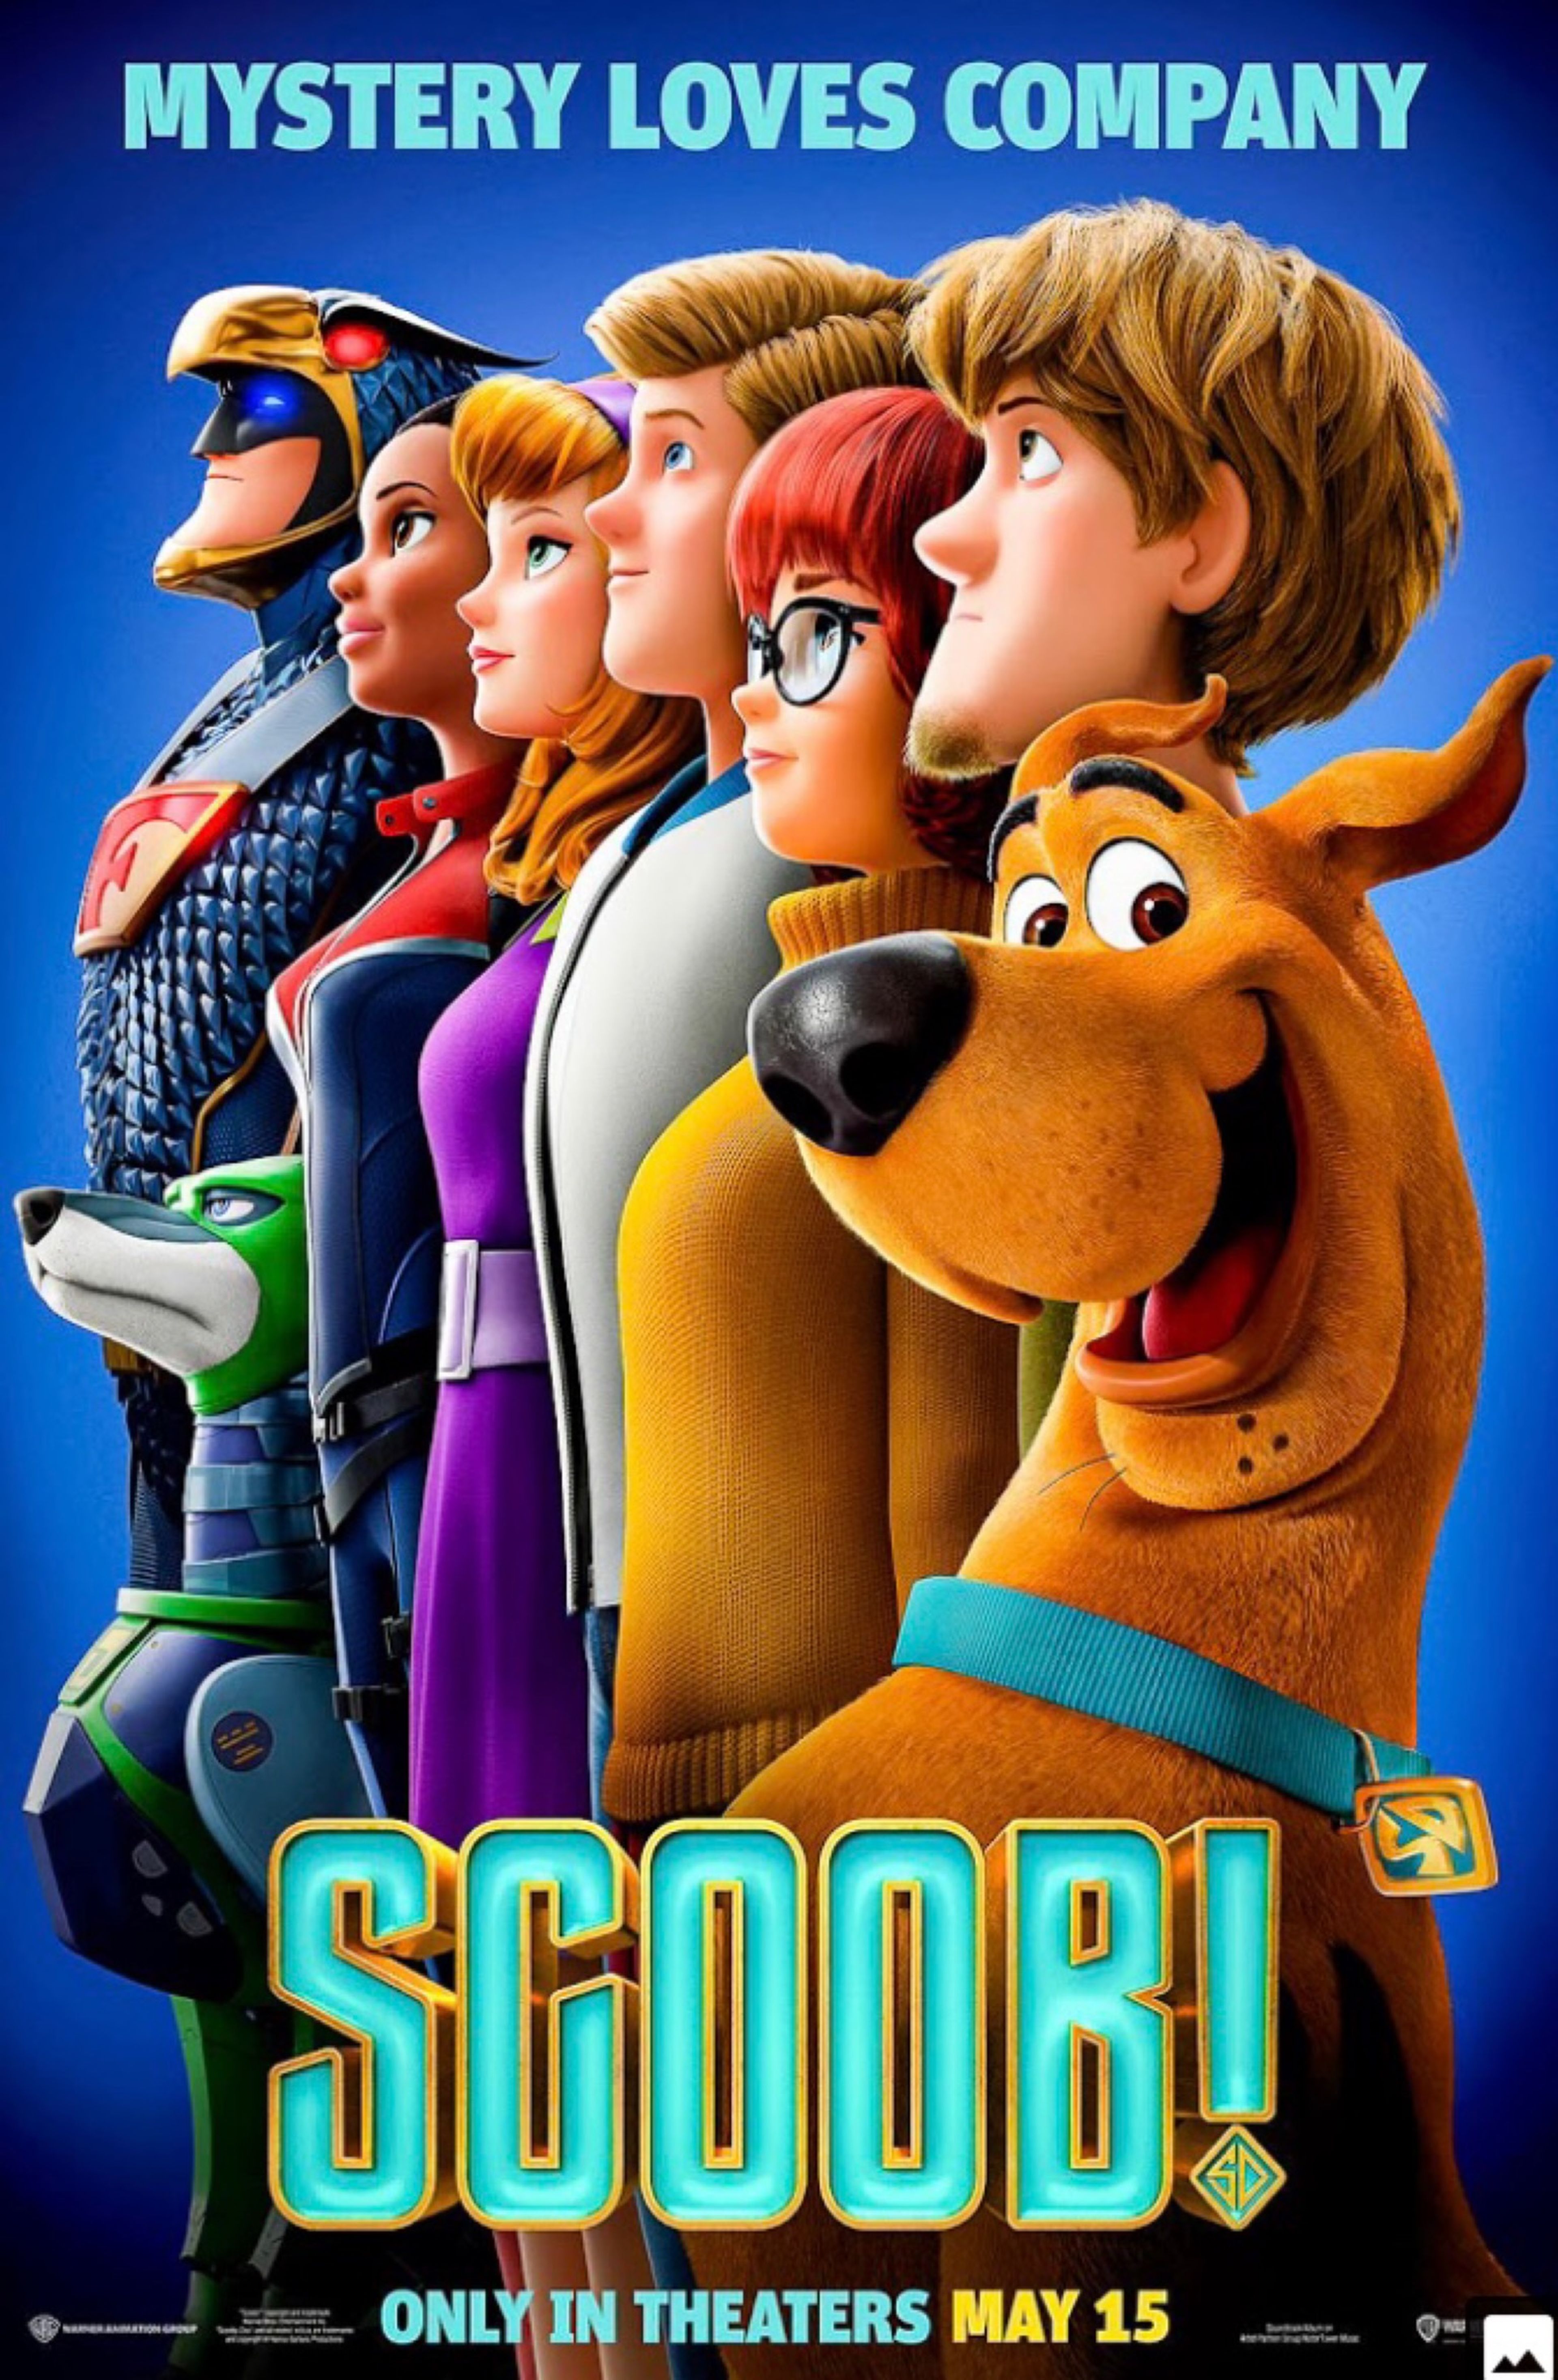 ¡Scooby! - poster